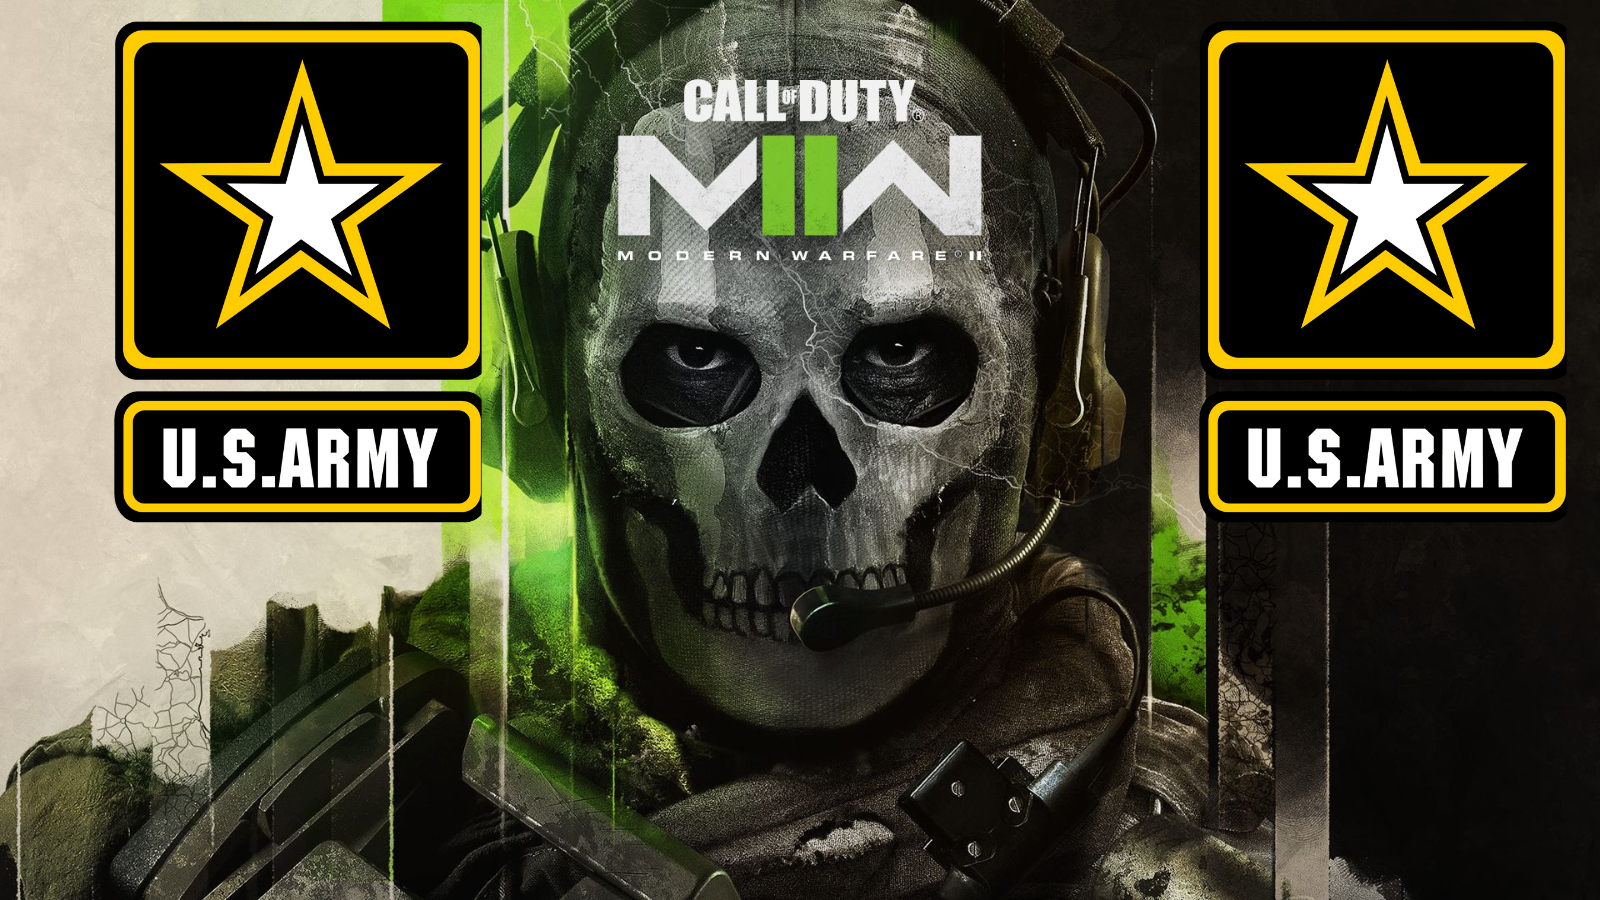 US Army Wanted To Spend $1 Million To Try To Use Call Of Duty To Recruit Black And Latino Men